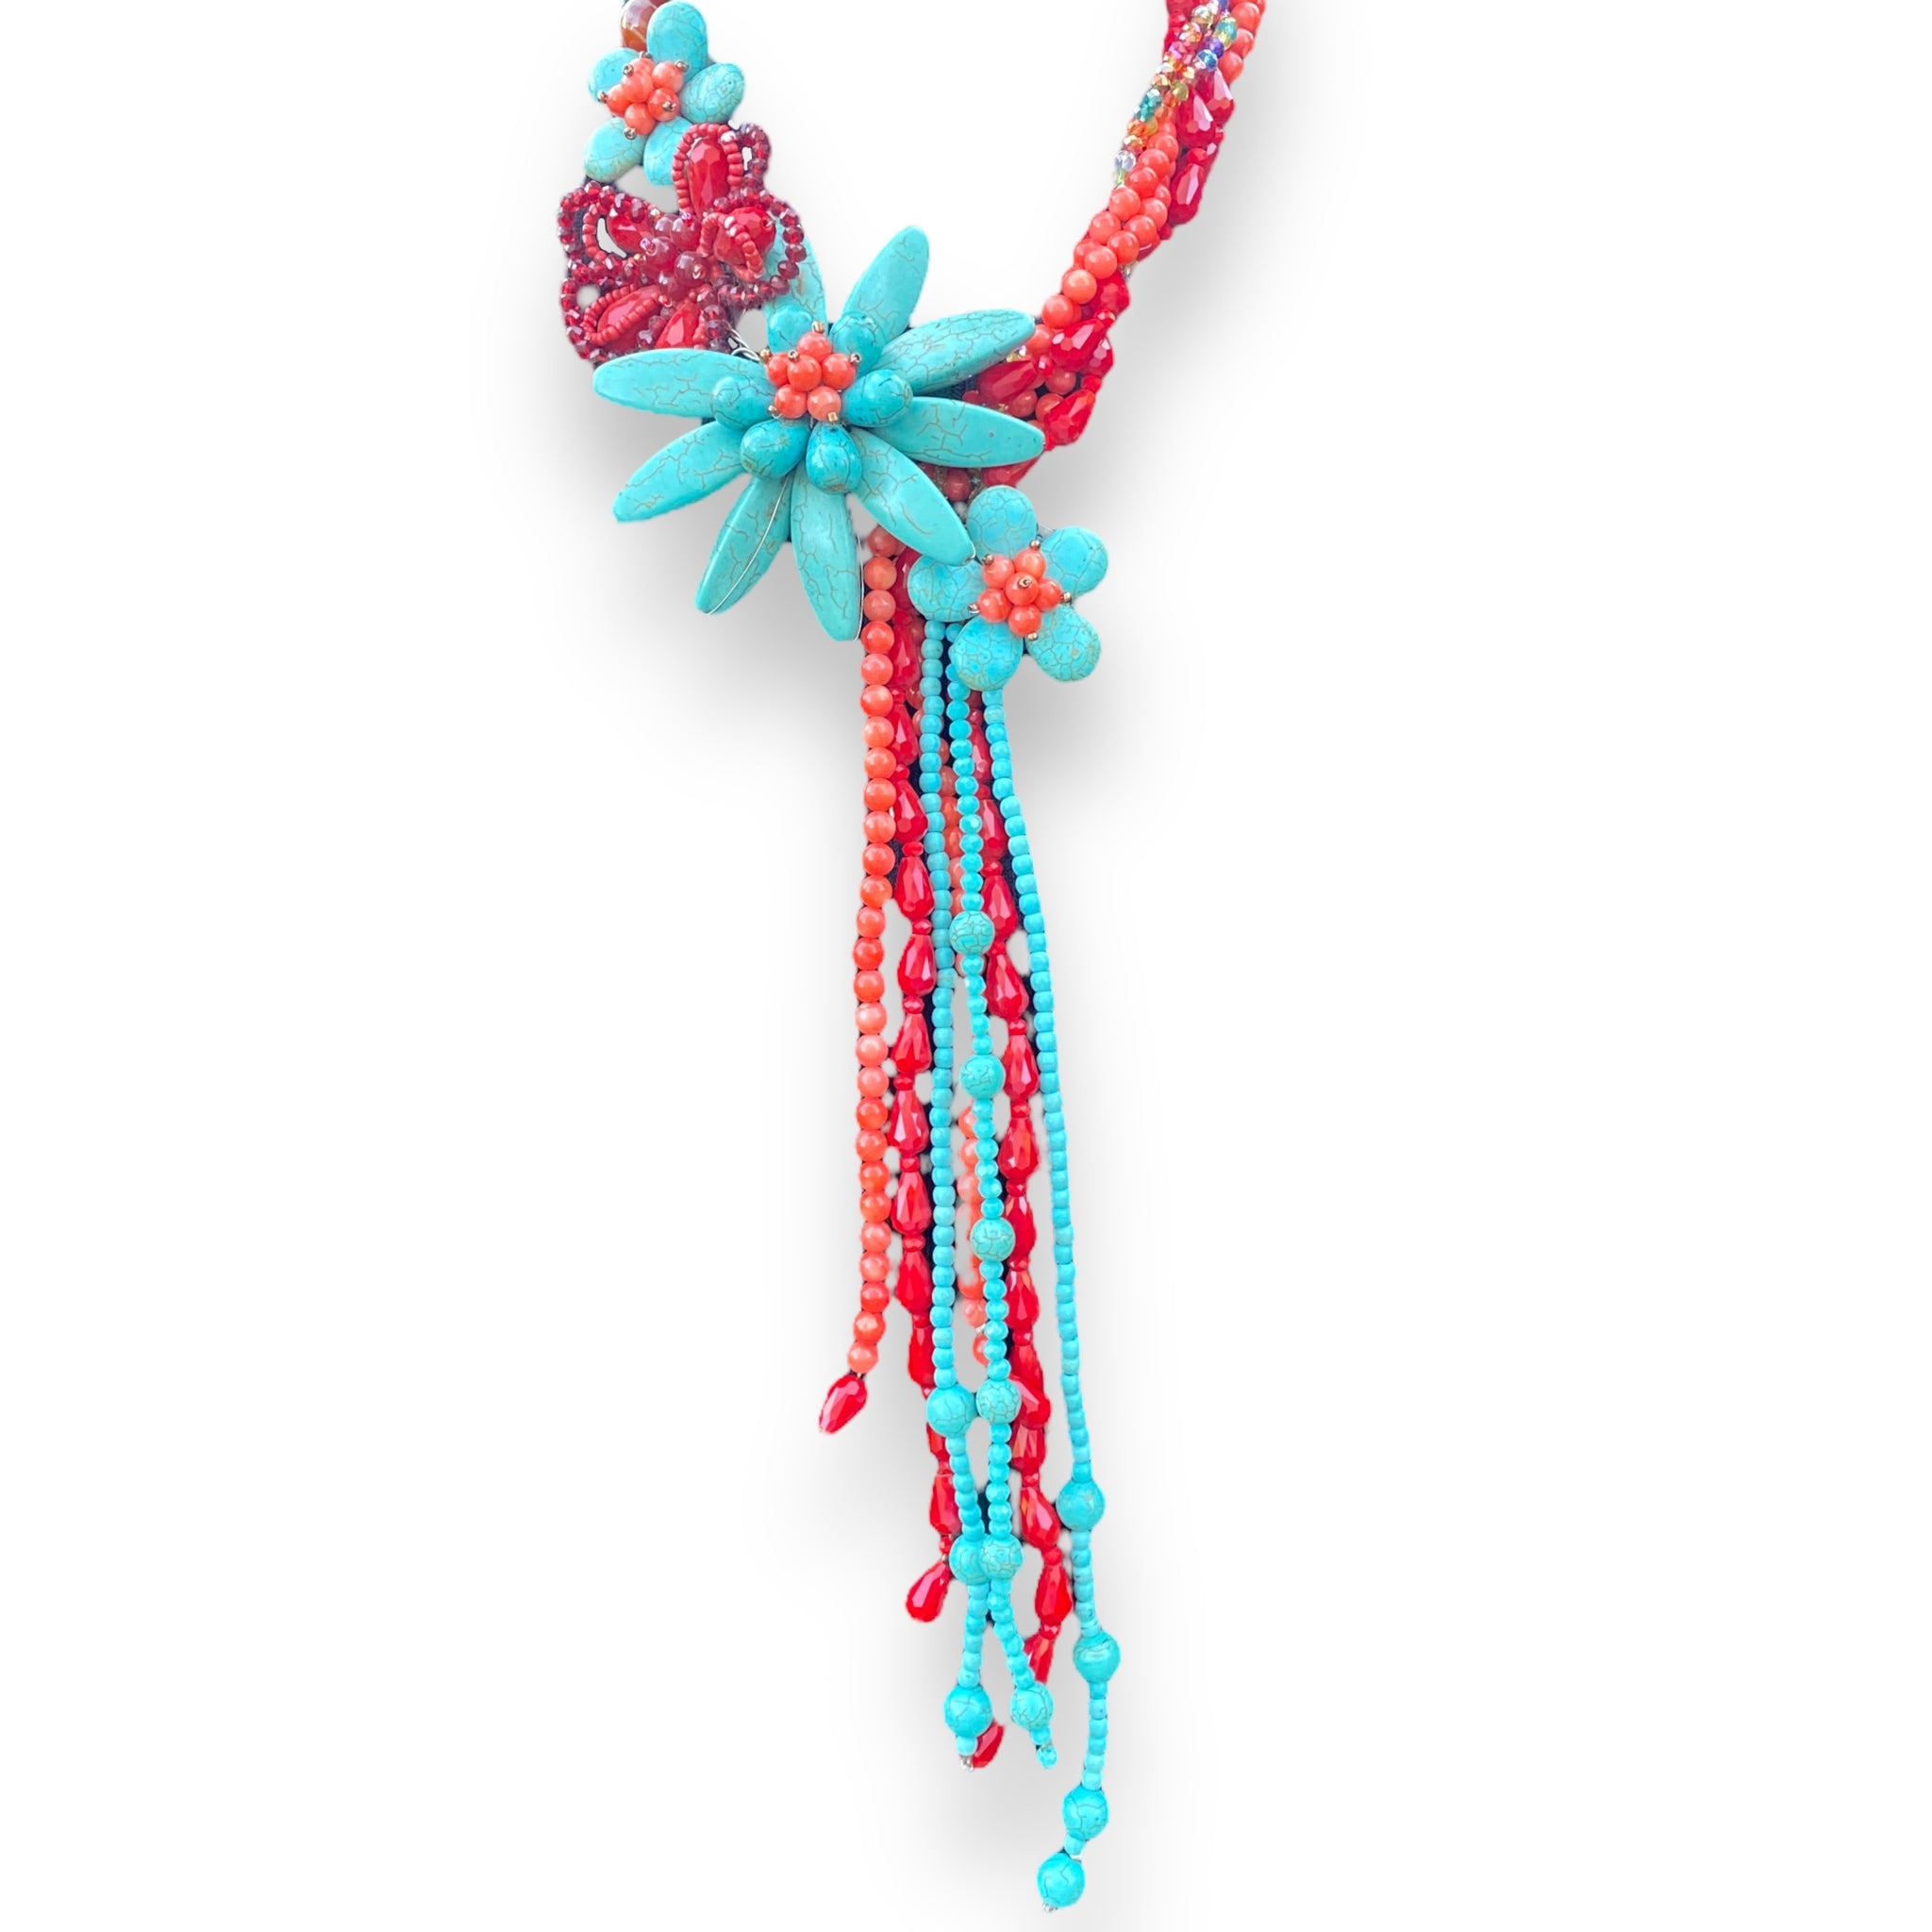 Handmade Tassel Necklace Beads 21" Turquoise Coral Artsy Choker Jewelry